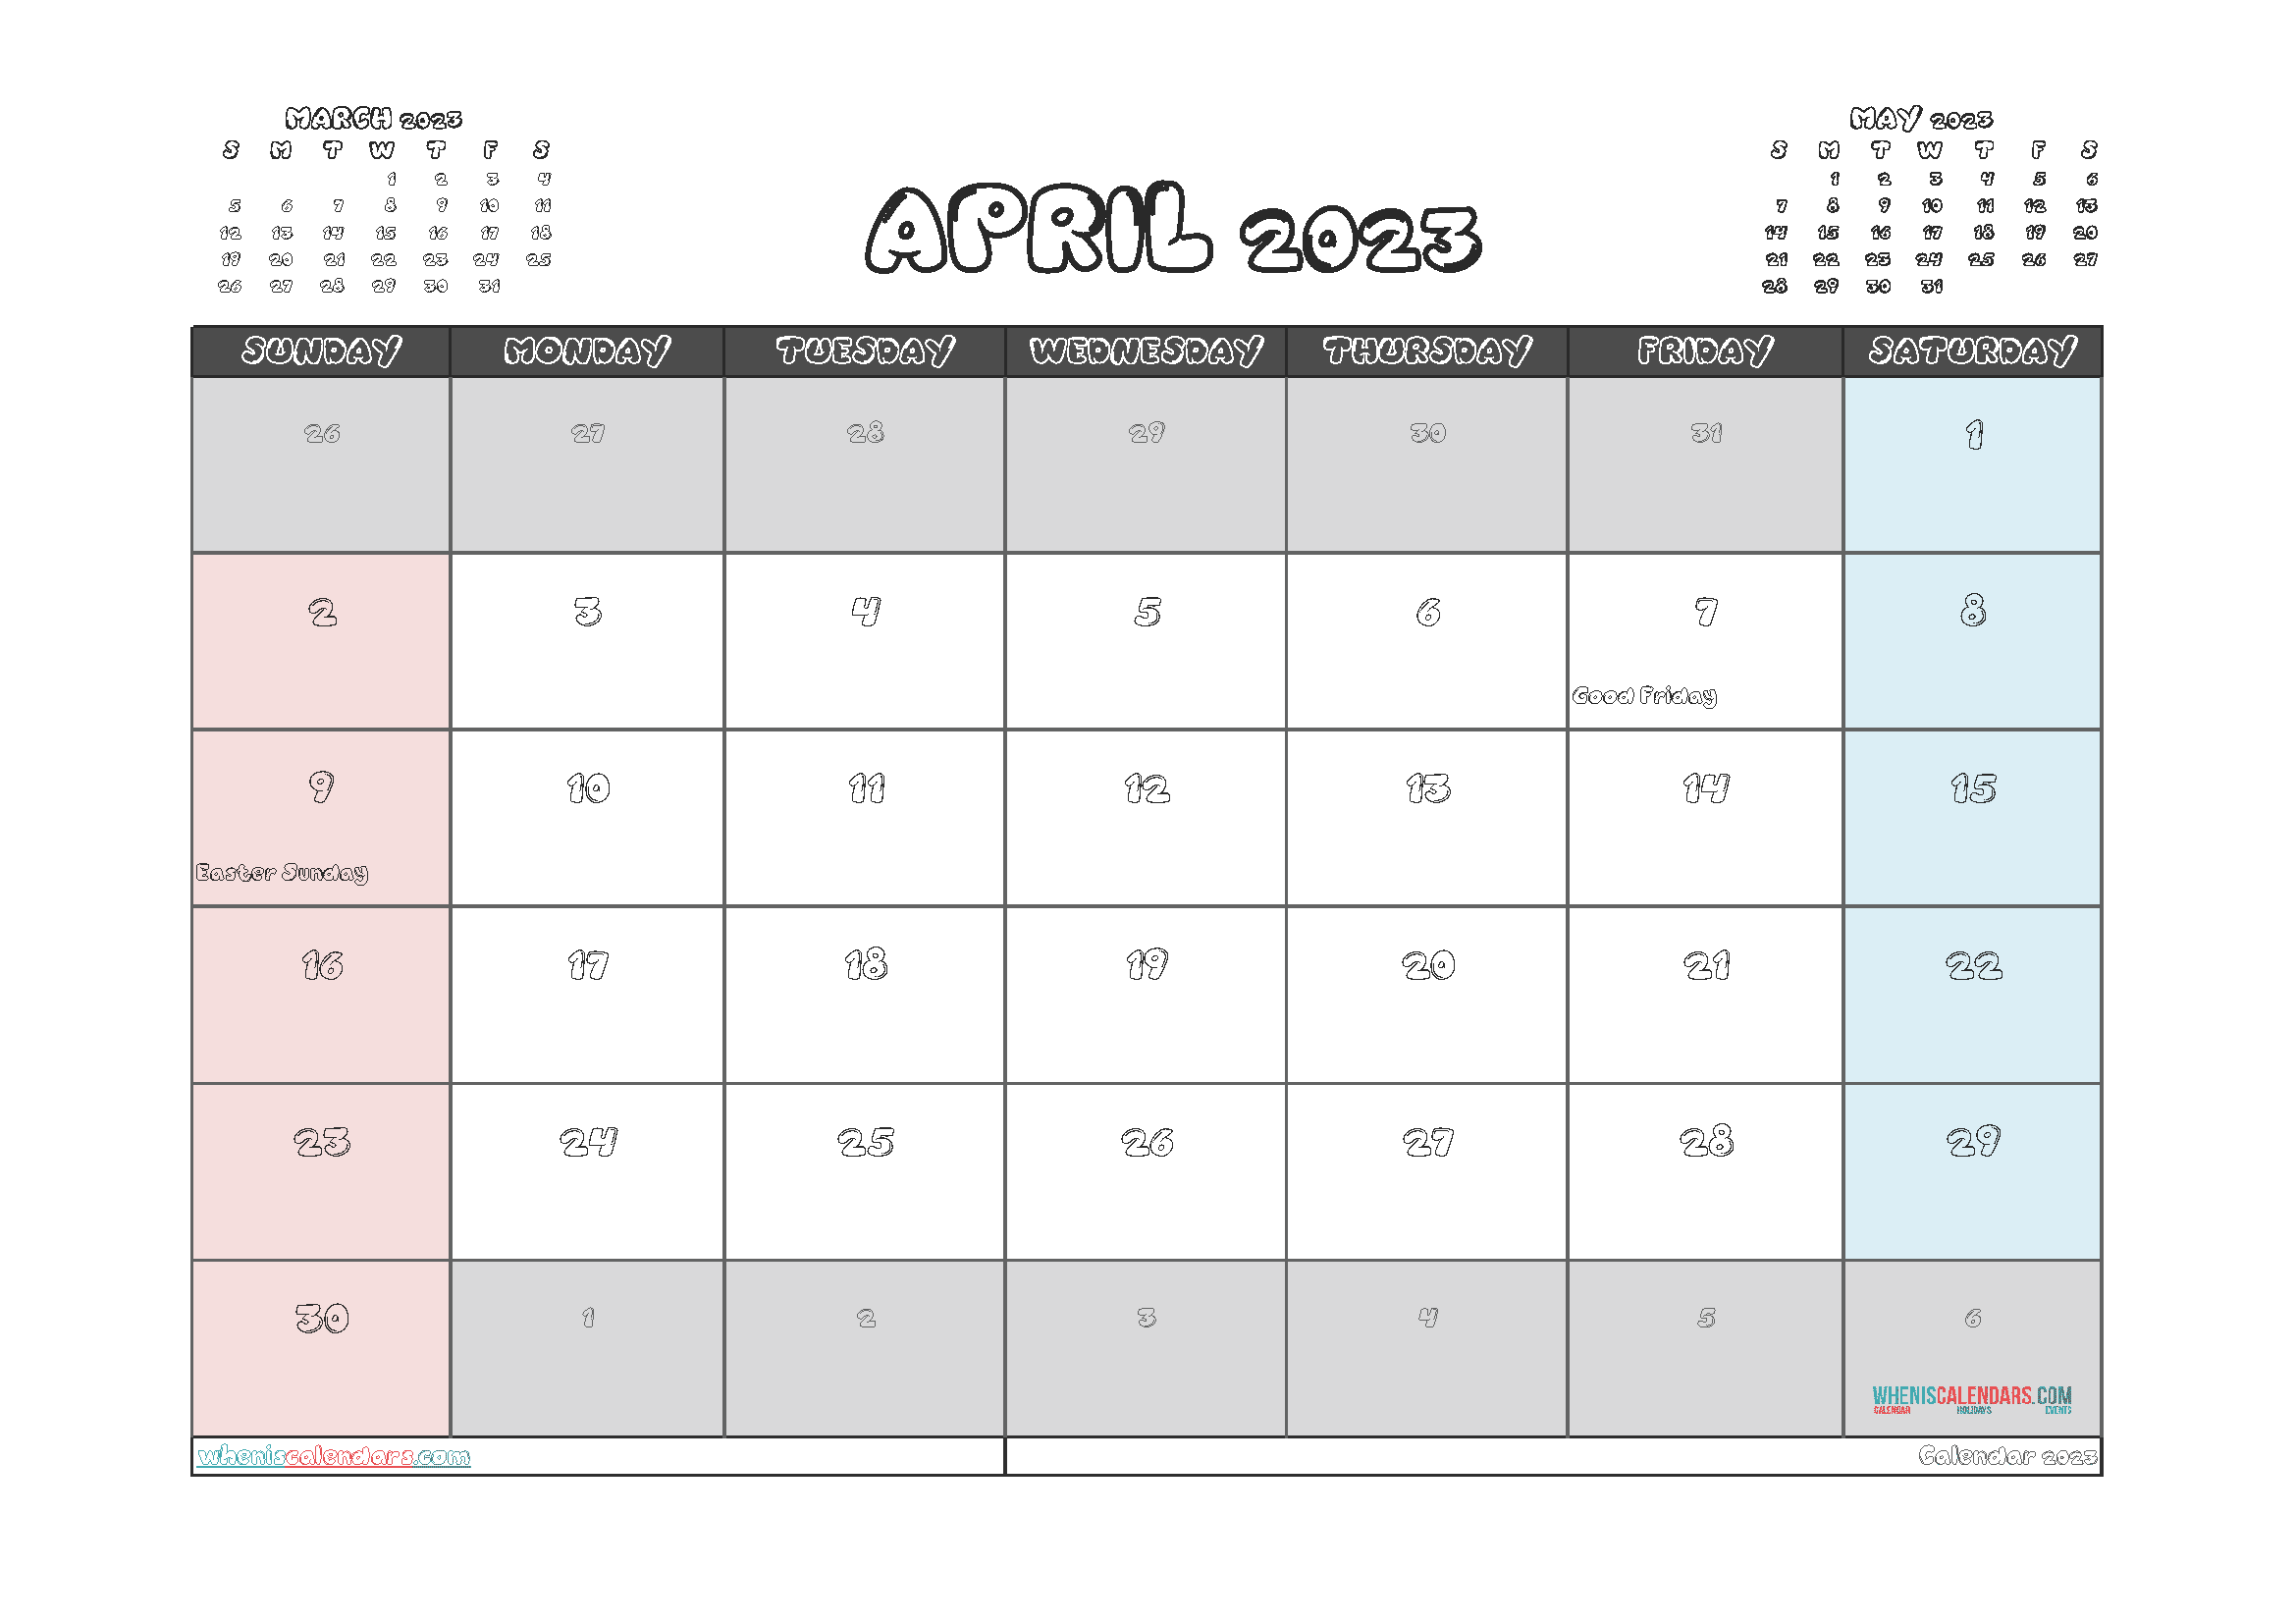 Free Printable Calendar 2023 April with Holidays PDF in Landscape